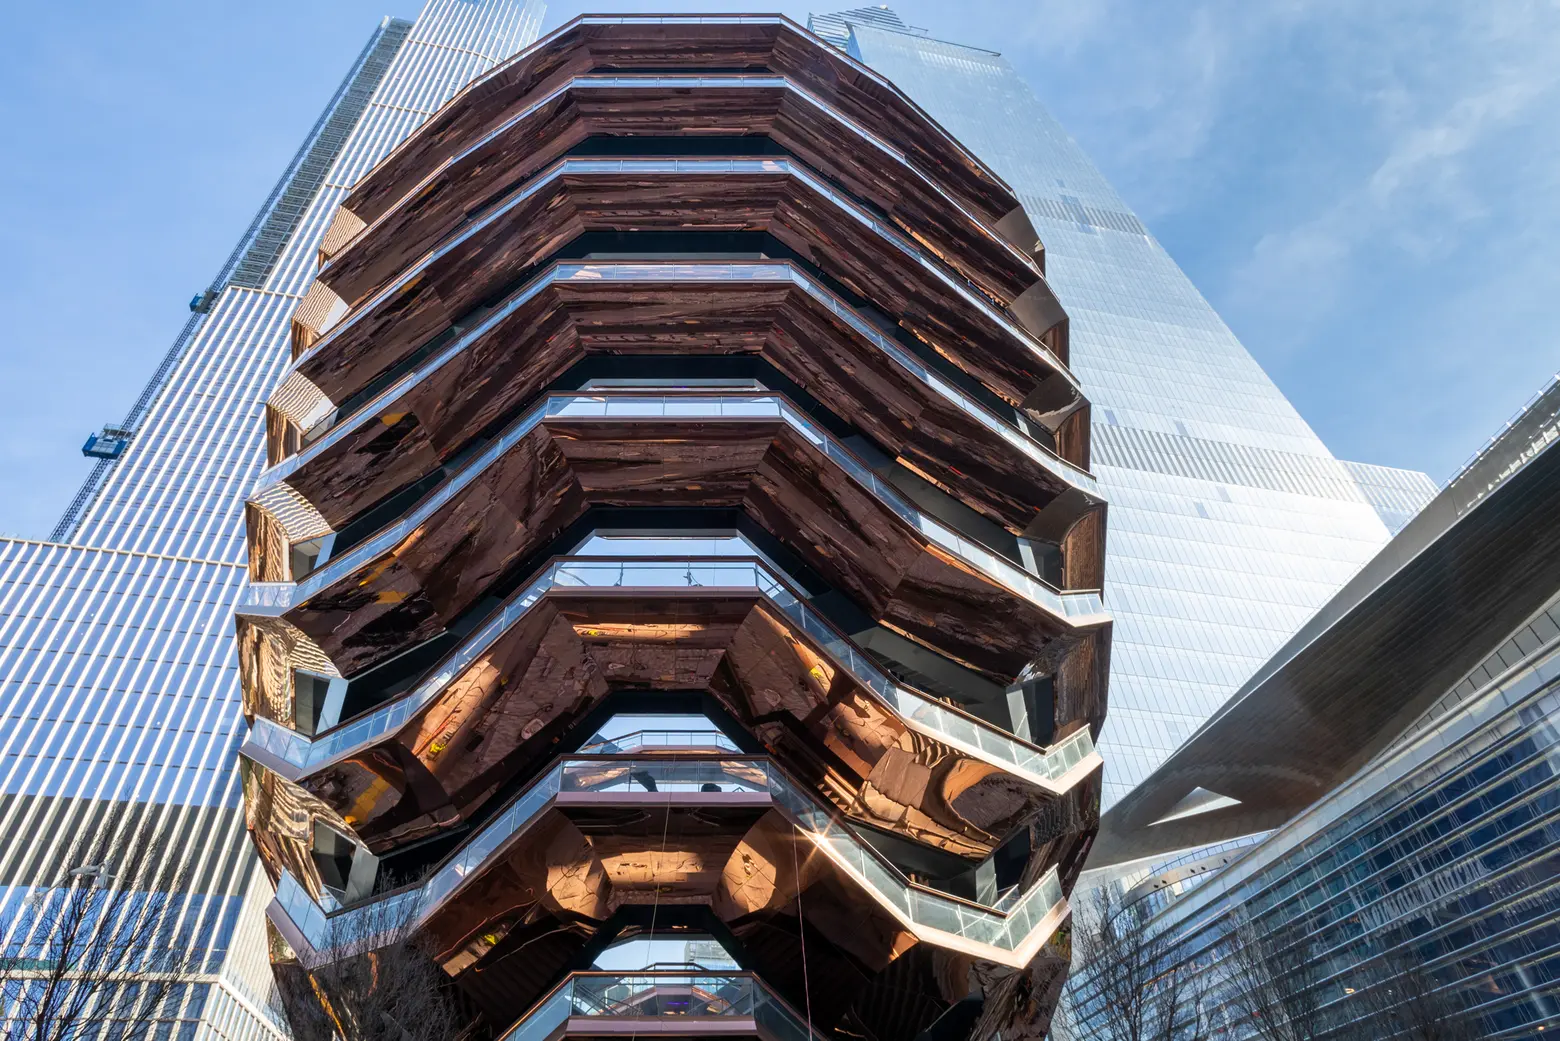 Photos you take of the Vessel at Hudson Yards do not belong to you